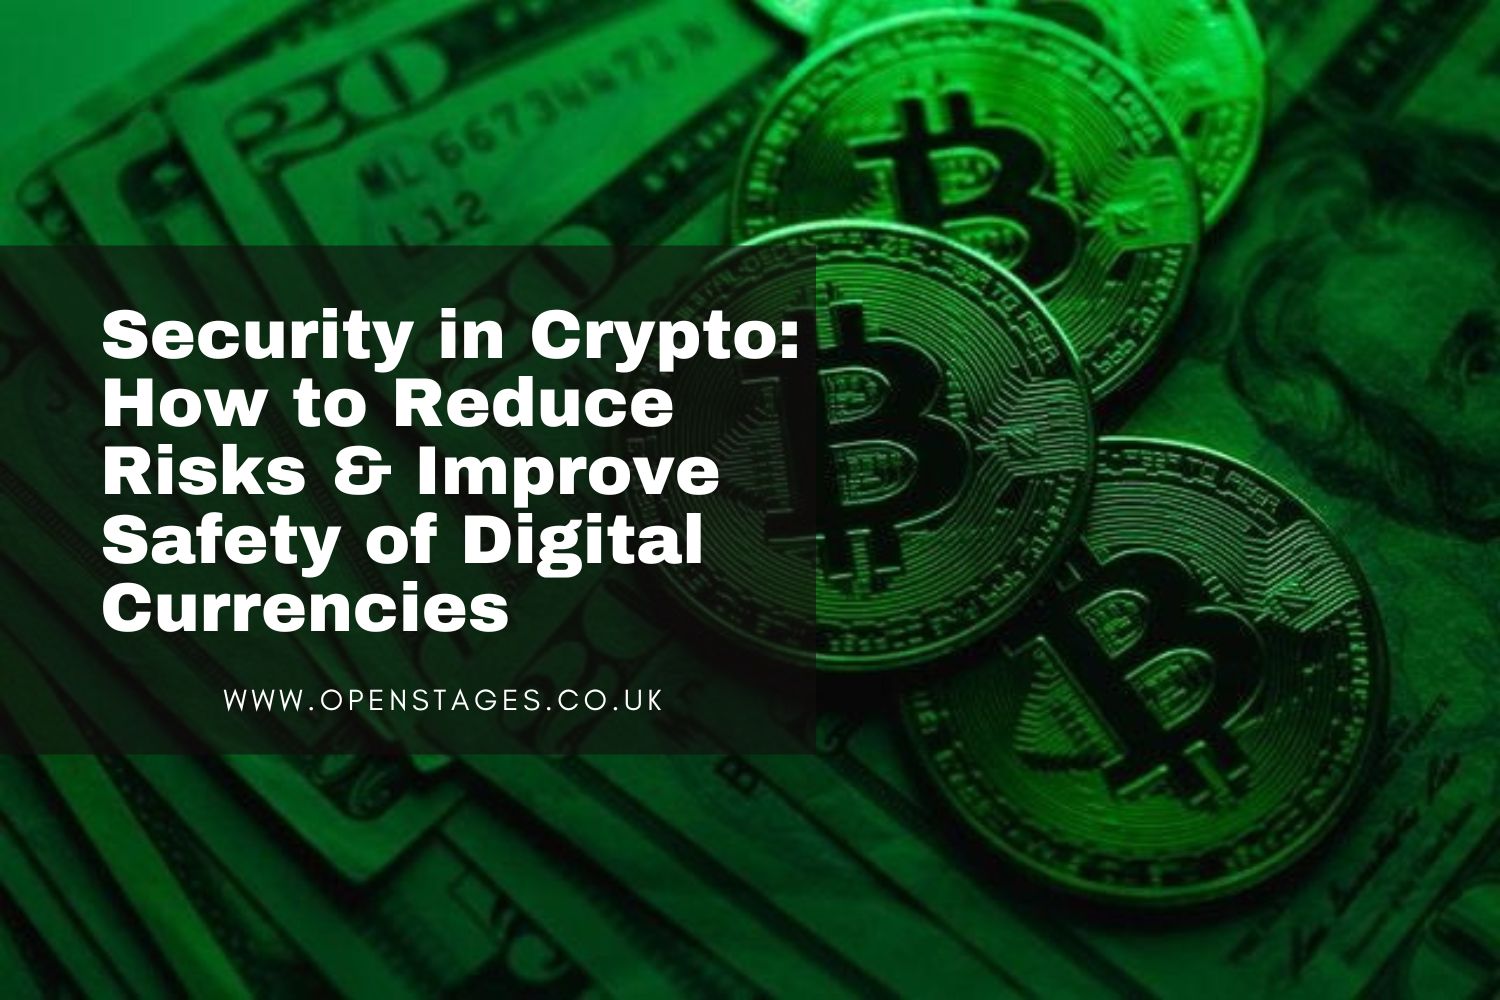 Security in Crypto: How to Reduce Risks & Improve Safety of Digital Currencies?